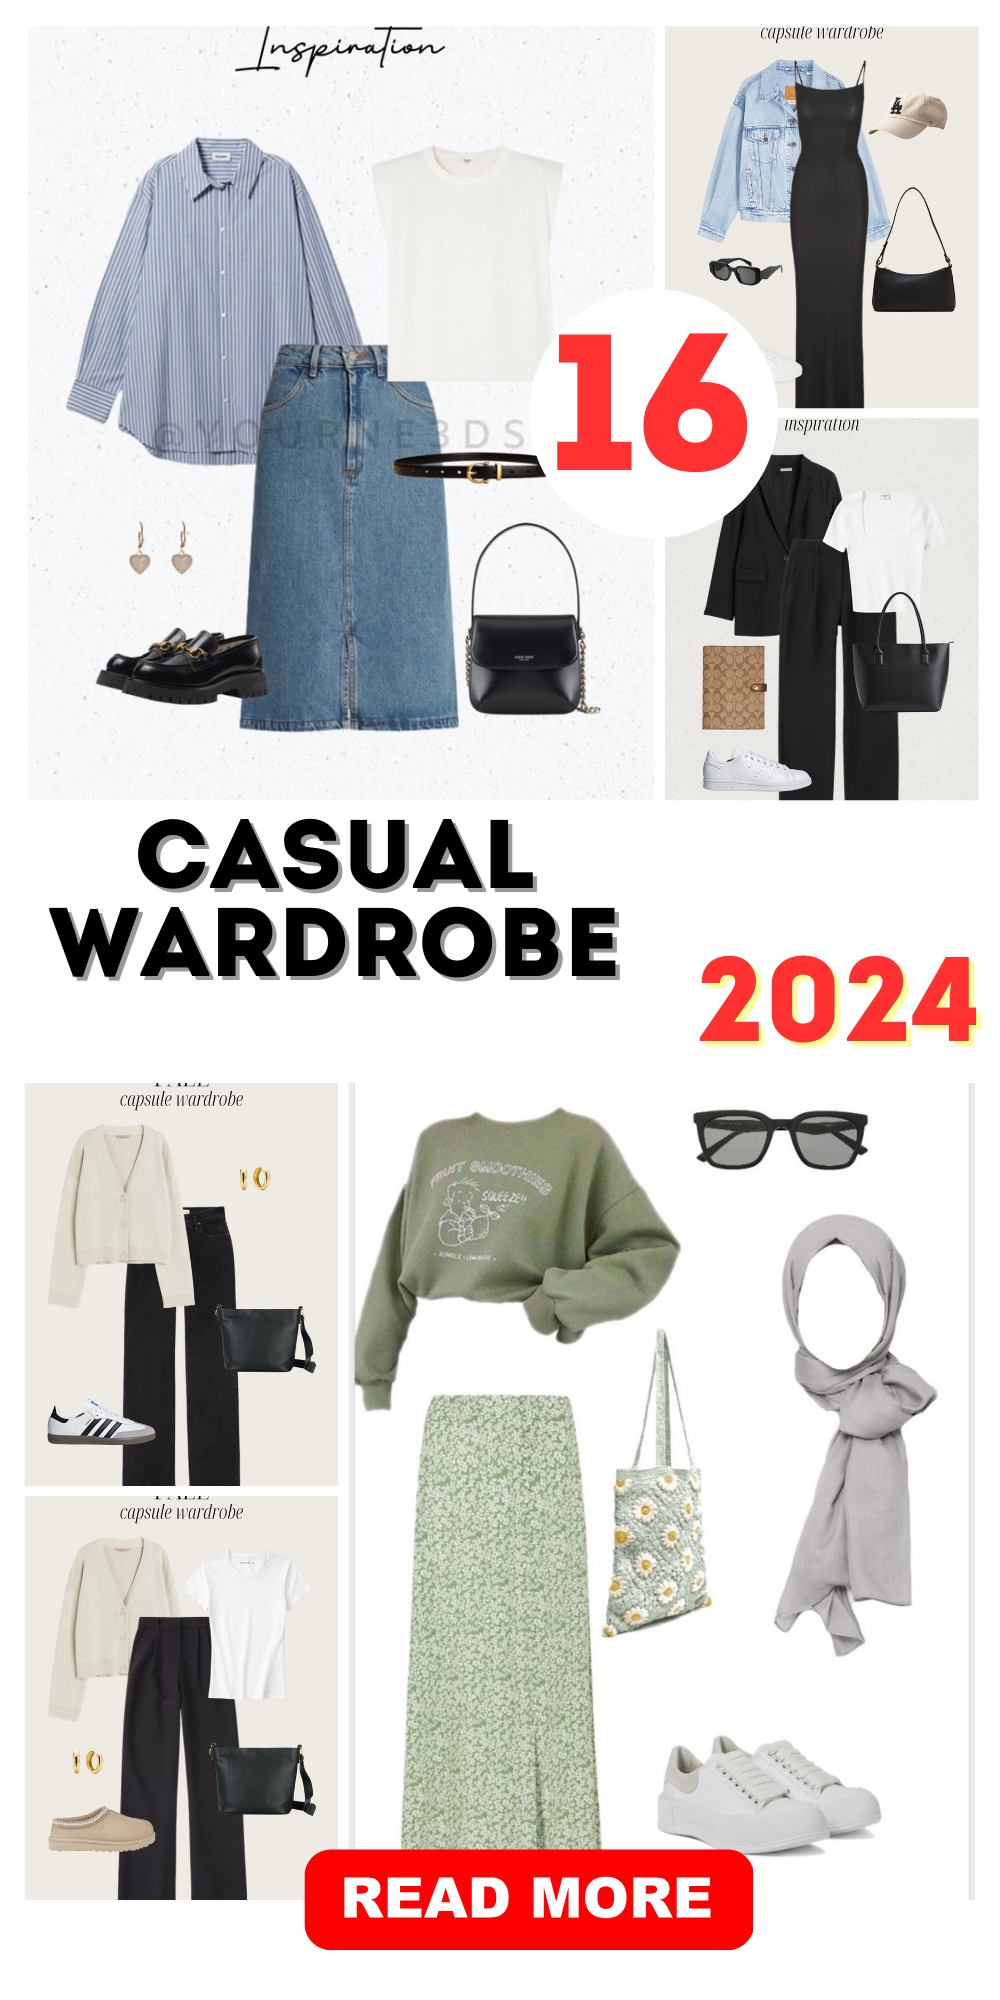 2024 Casual Wardrobe Capsule Essentials for Modern Women's Style